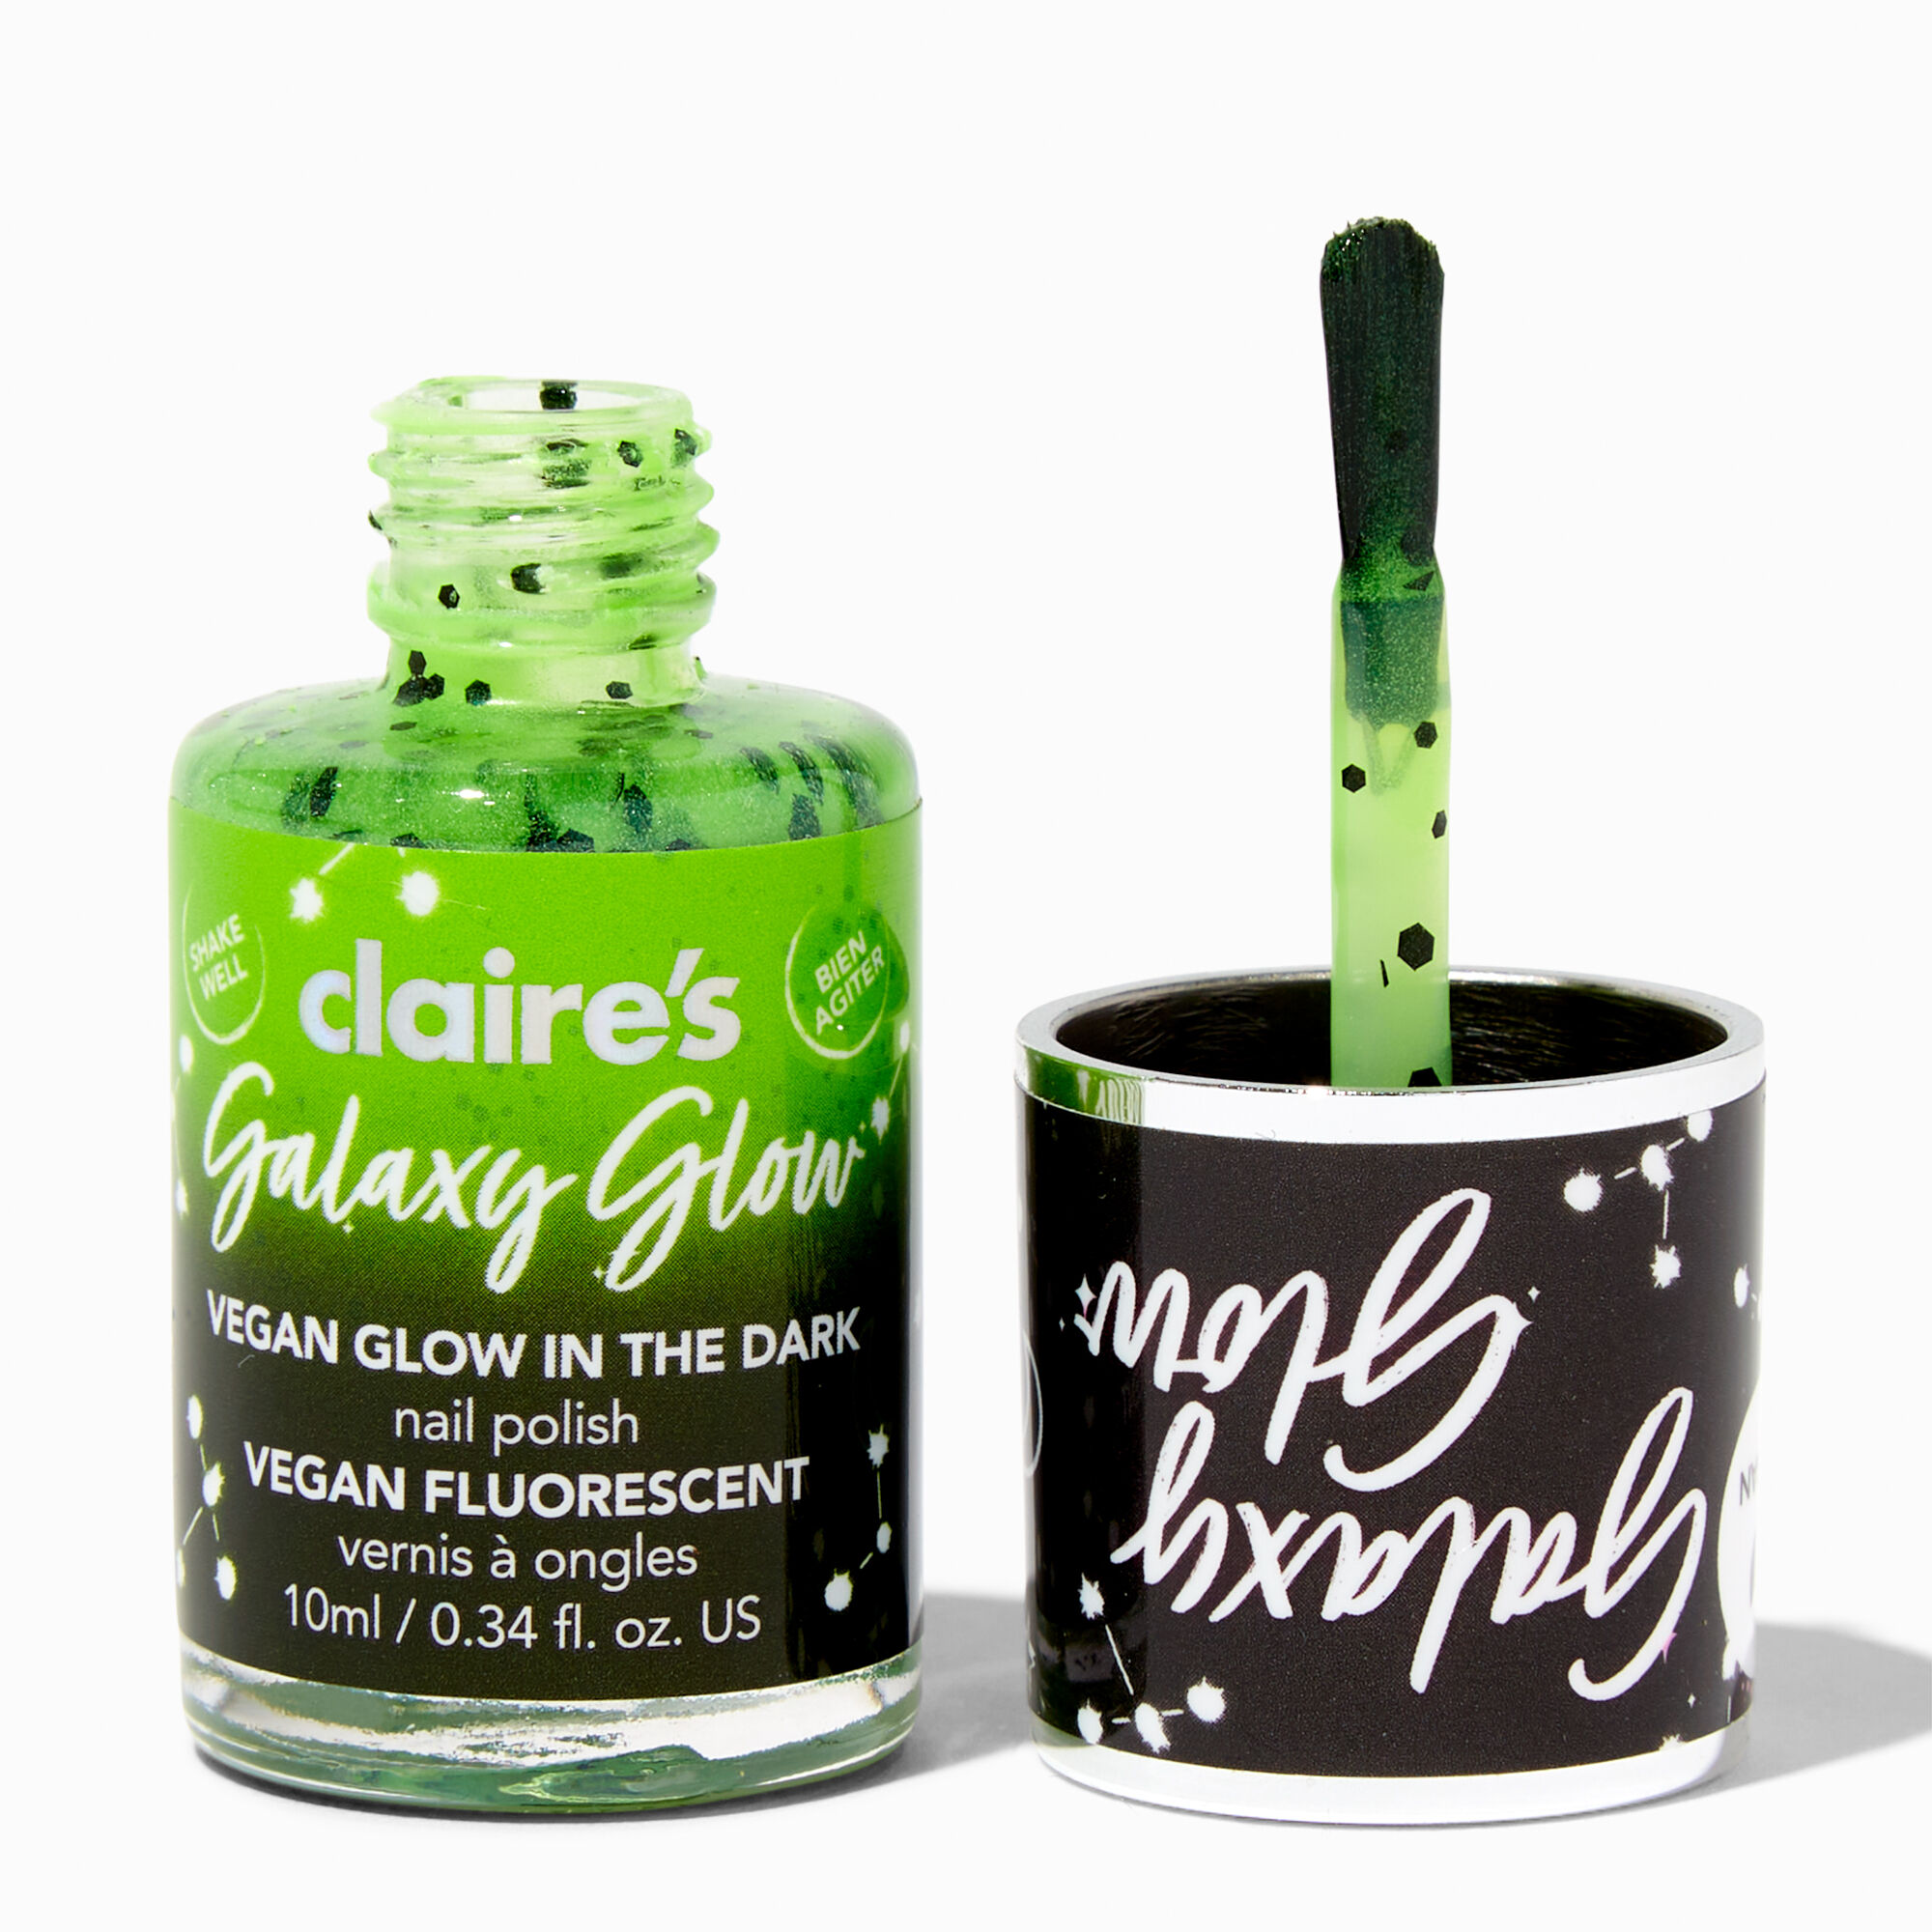 View Claires Galaxy Glow Vegan In The Dark Nail Polish Light Green information